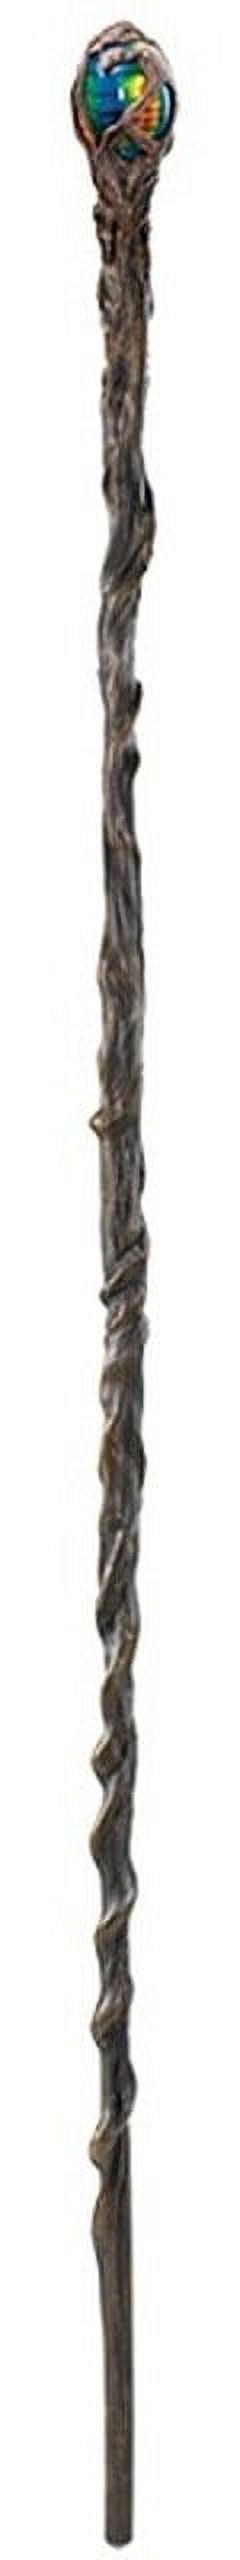 Maleficent Staff Classic Halloween Accessory - image 1 of 4